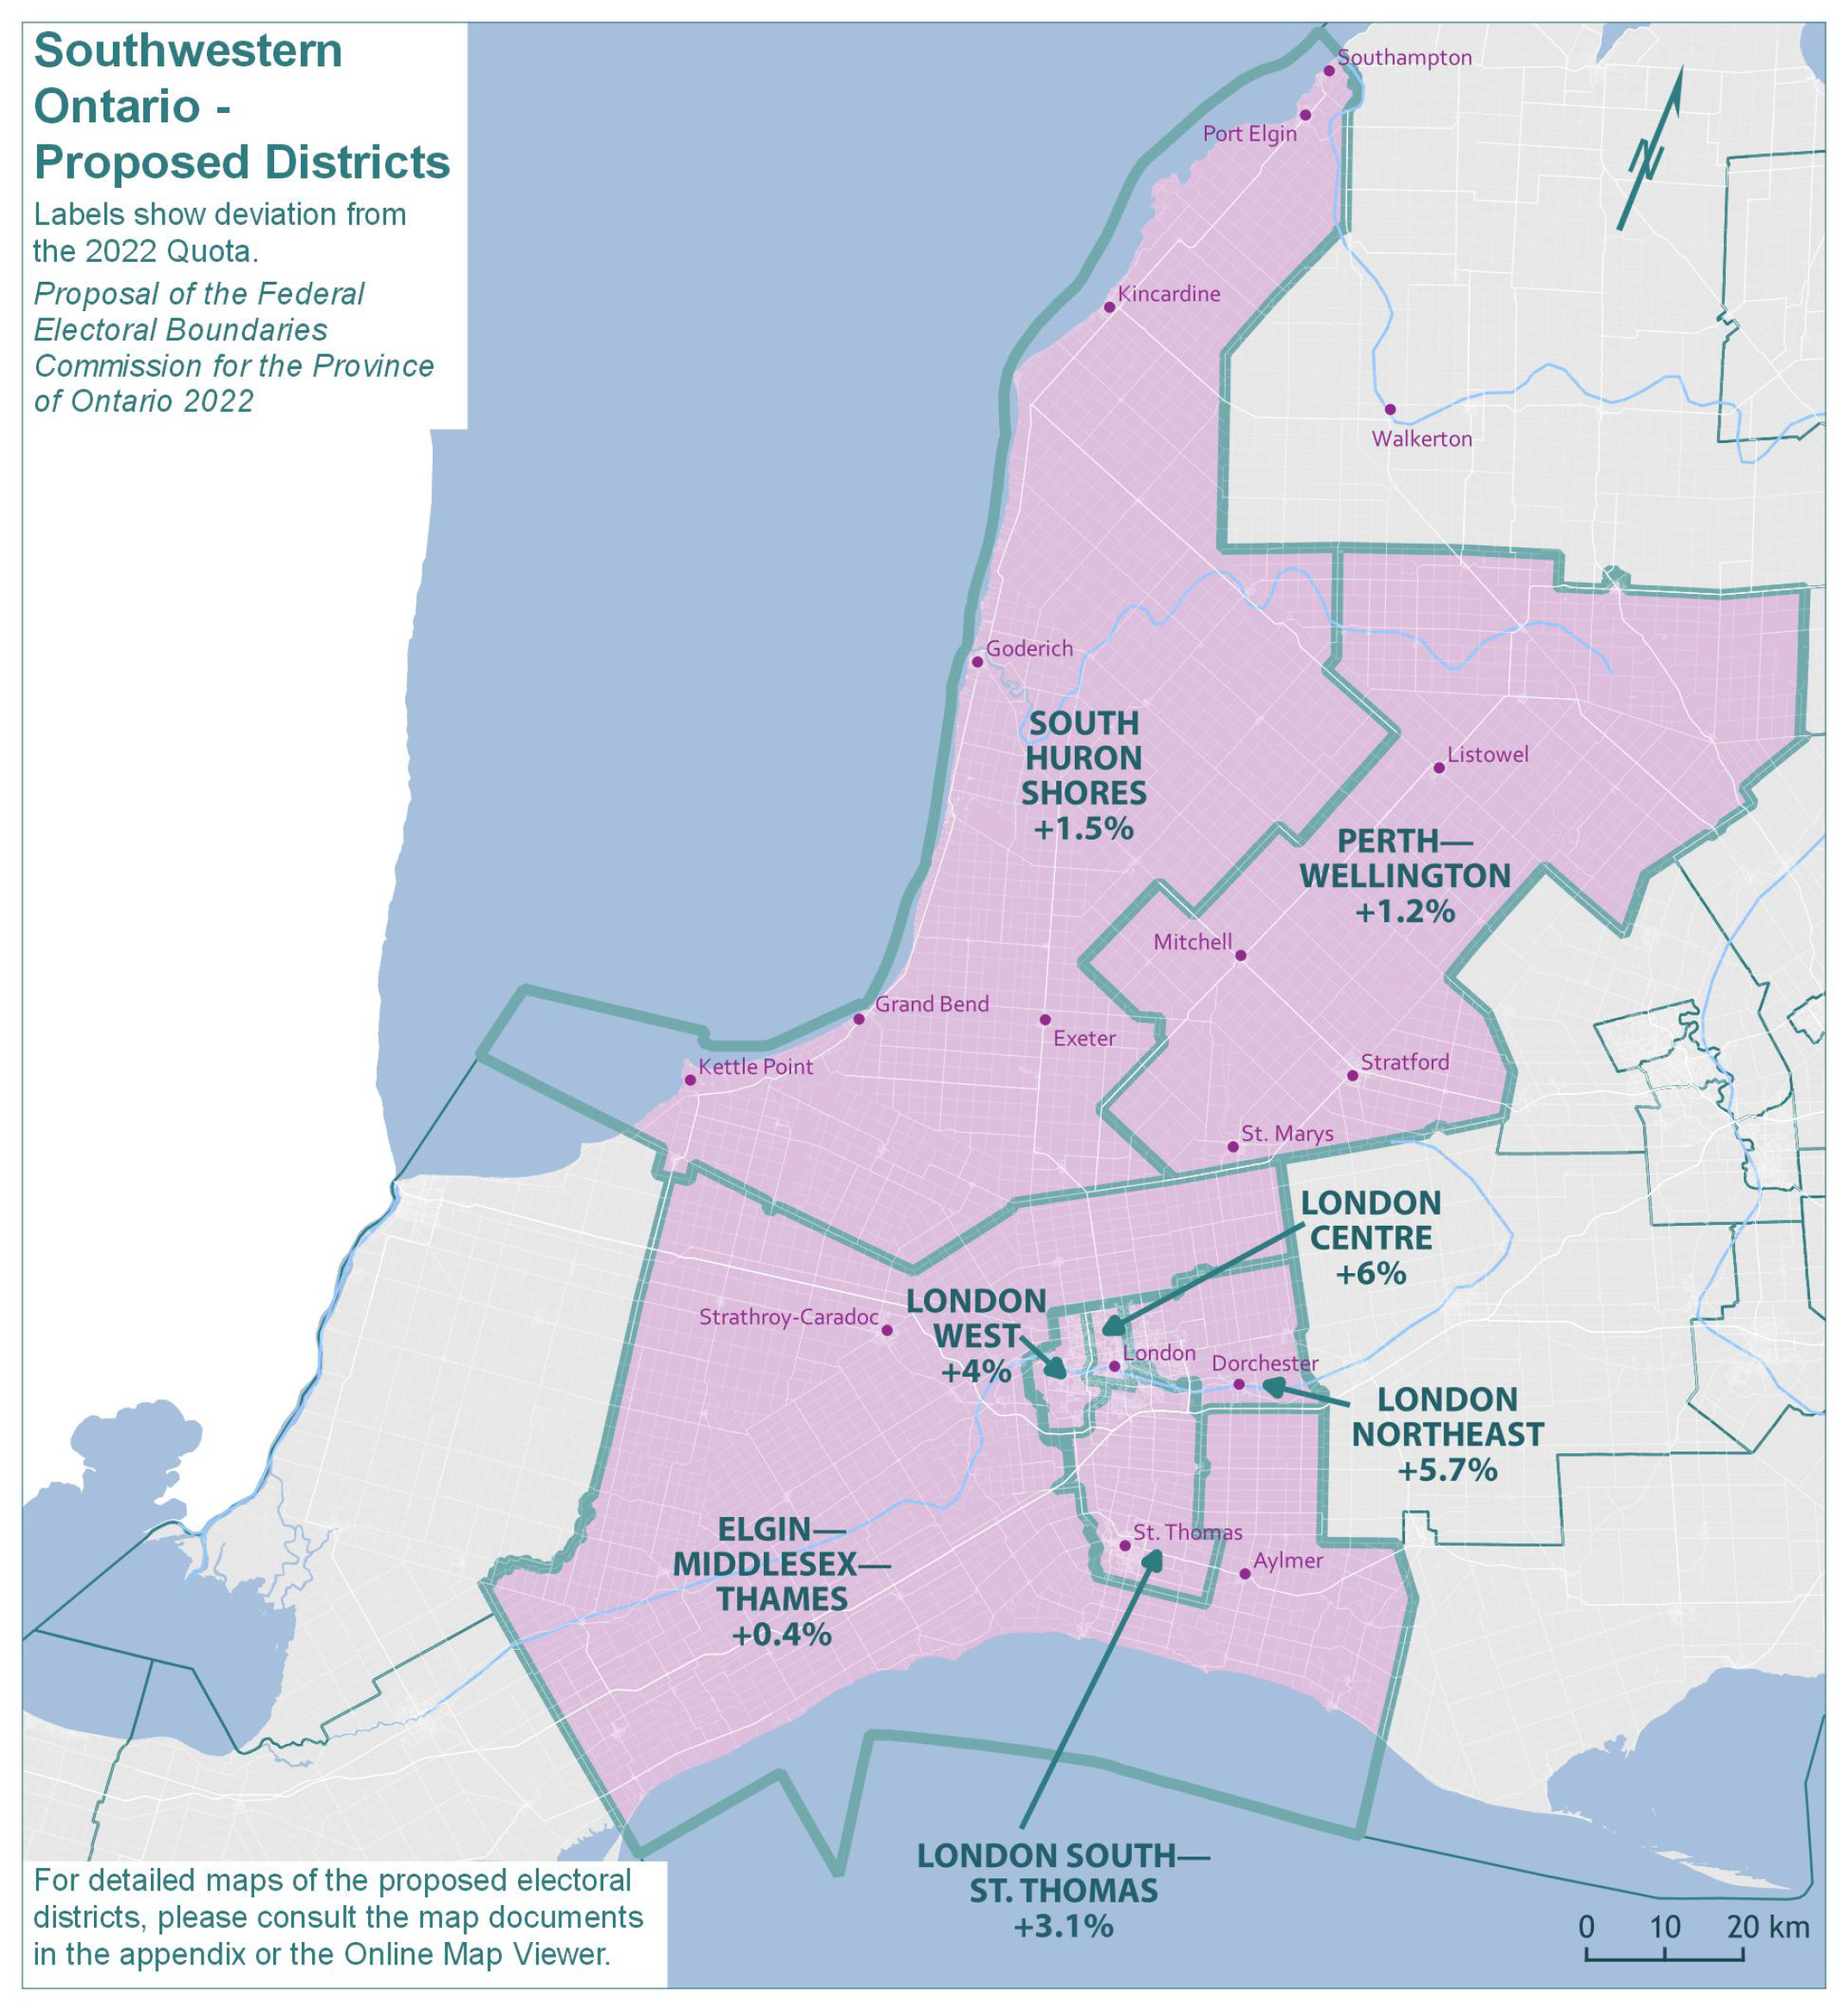 Southwestern Ontario - Proposed Districts 